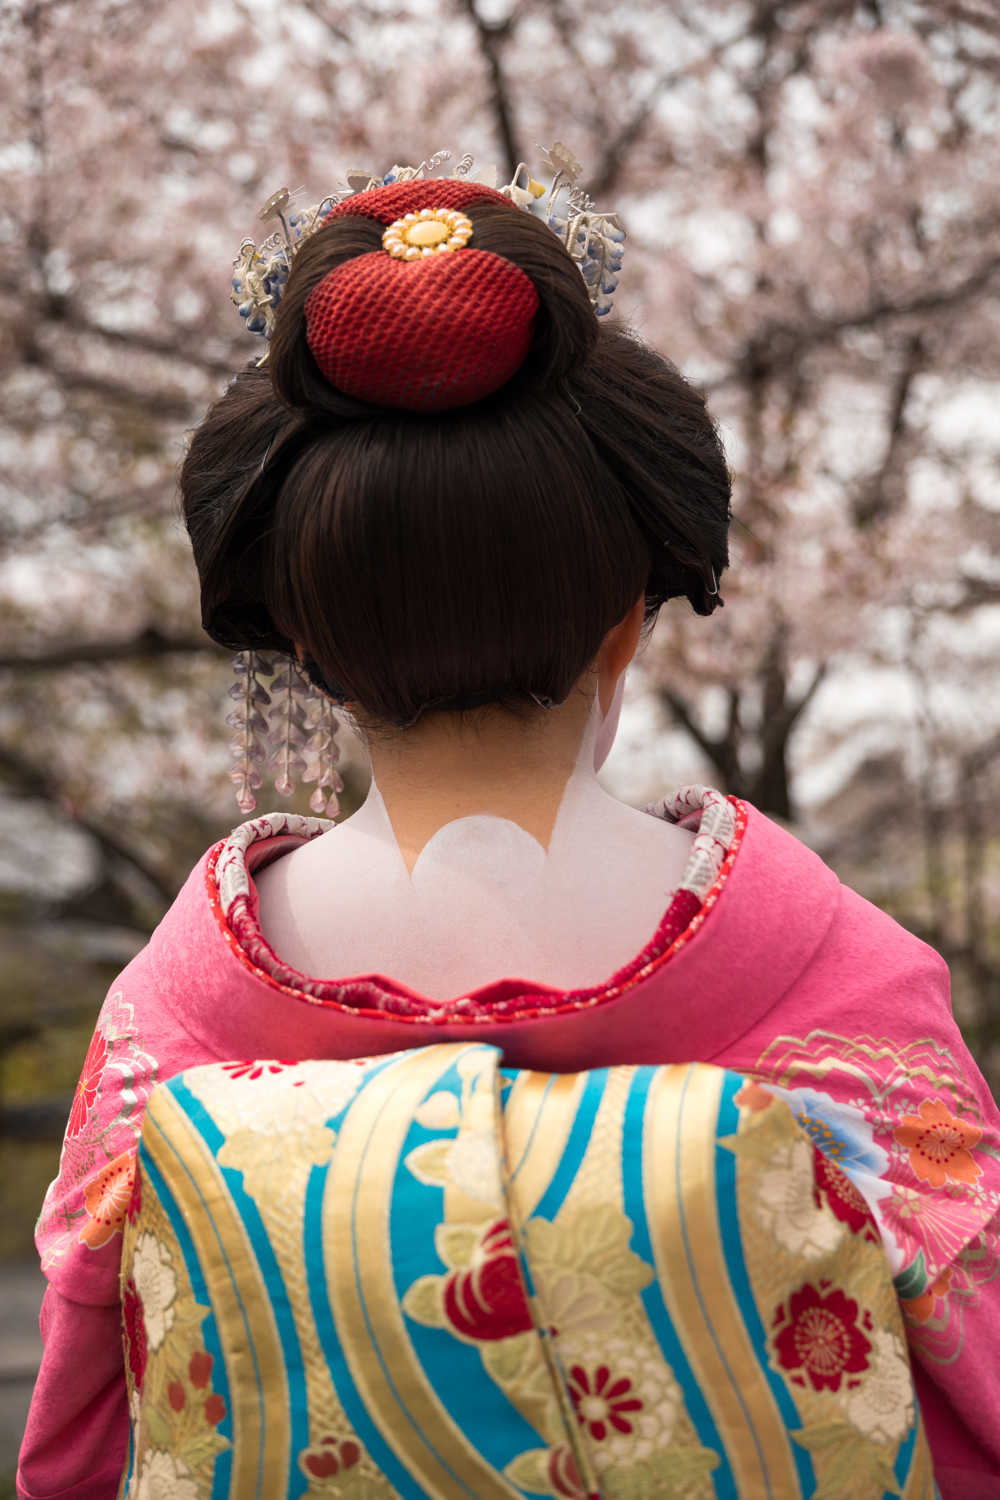 Chinese woman in Gion, Kyoto.